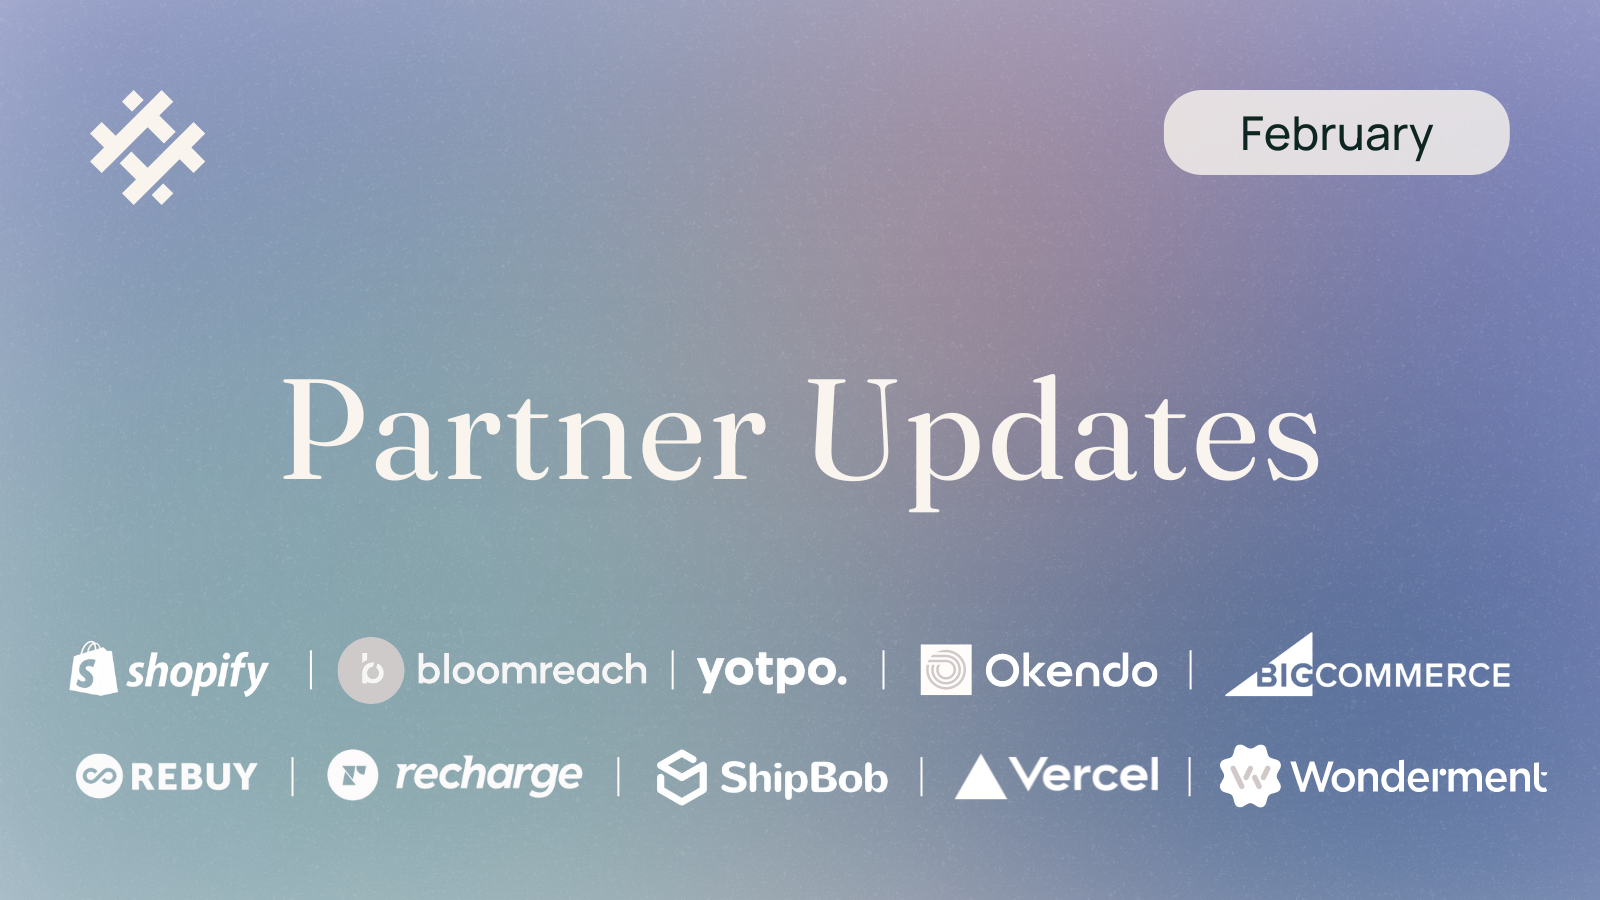 A graphic titled 'Partner Updates' for February, showcasing a series of logos from various companies involved in eCommerce. The logos are for Shopify, Bloomreach, Yotpo, Okendo, BigCommerce, Rebuy, Recharge, ShipBob, Vercel, and Wonderment, arranged in two rows with dividing lines between each name. The background is a gradient of cool tones, and the presentation is clean and professional, indicating a summary of recent updates or collaborations between these partners.